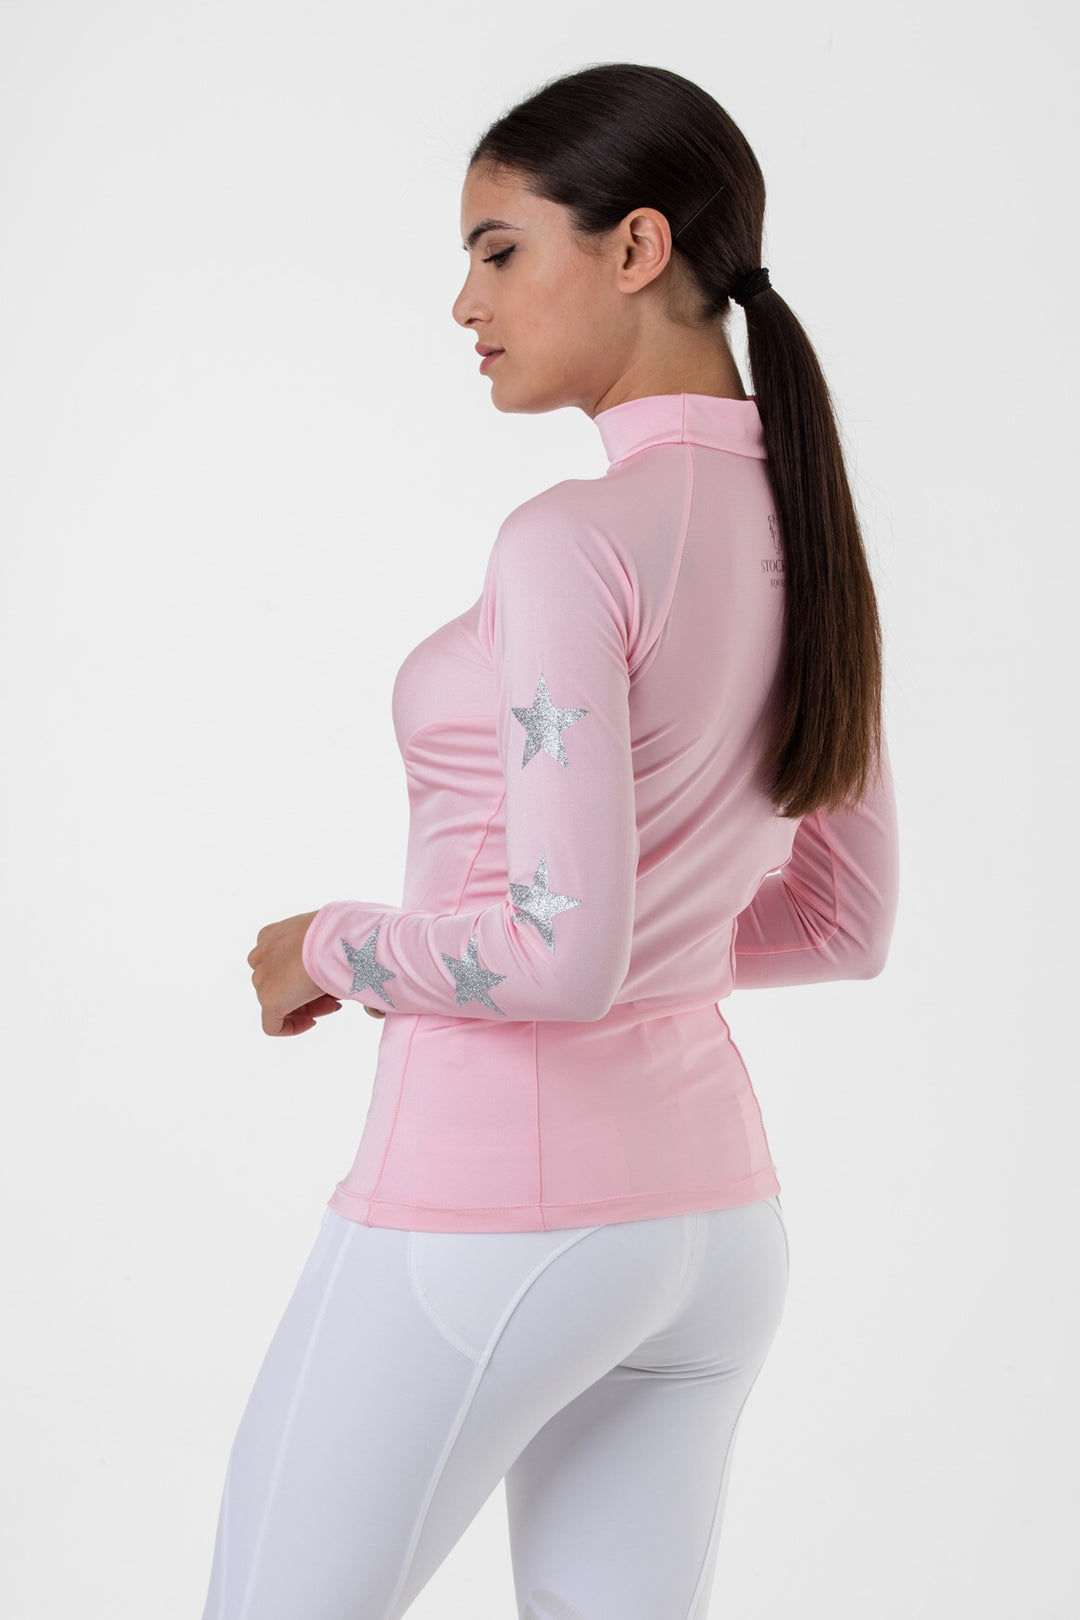 Baby Pink Constellation Riding Base layer 